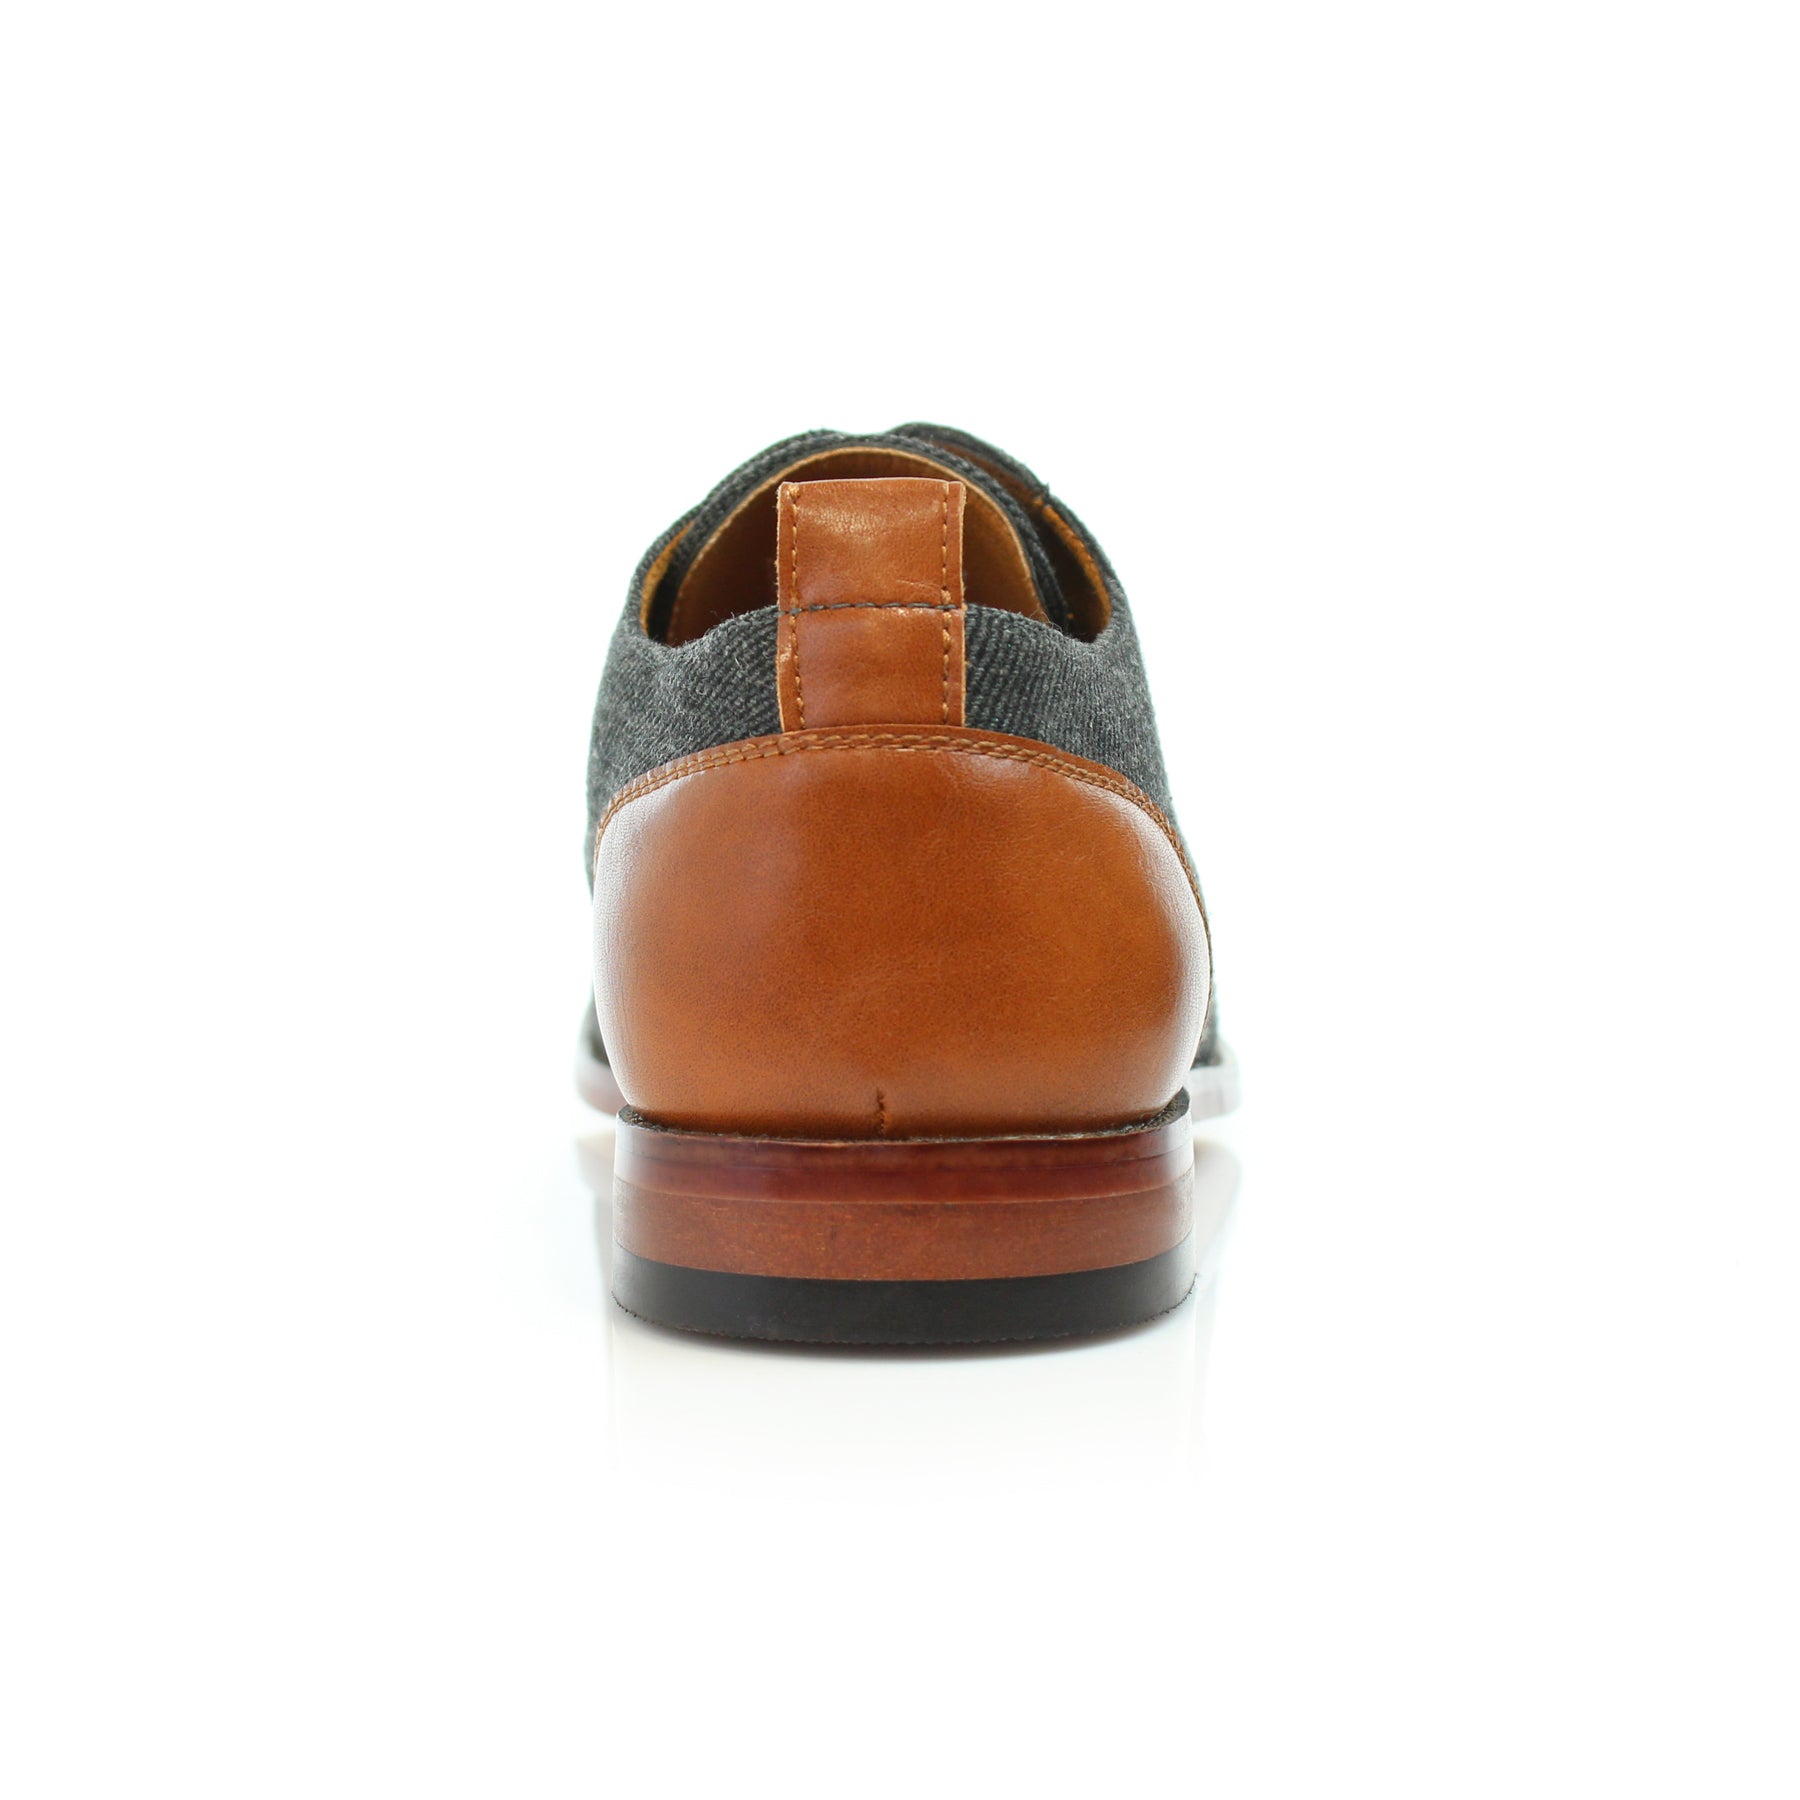 Duo-textured Woolen Derby Dress Shoes | Clifford by Polar Fox | Conal Footwear | Back Angle View